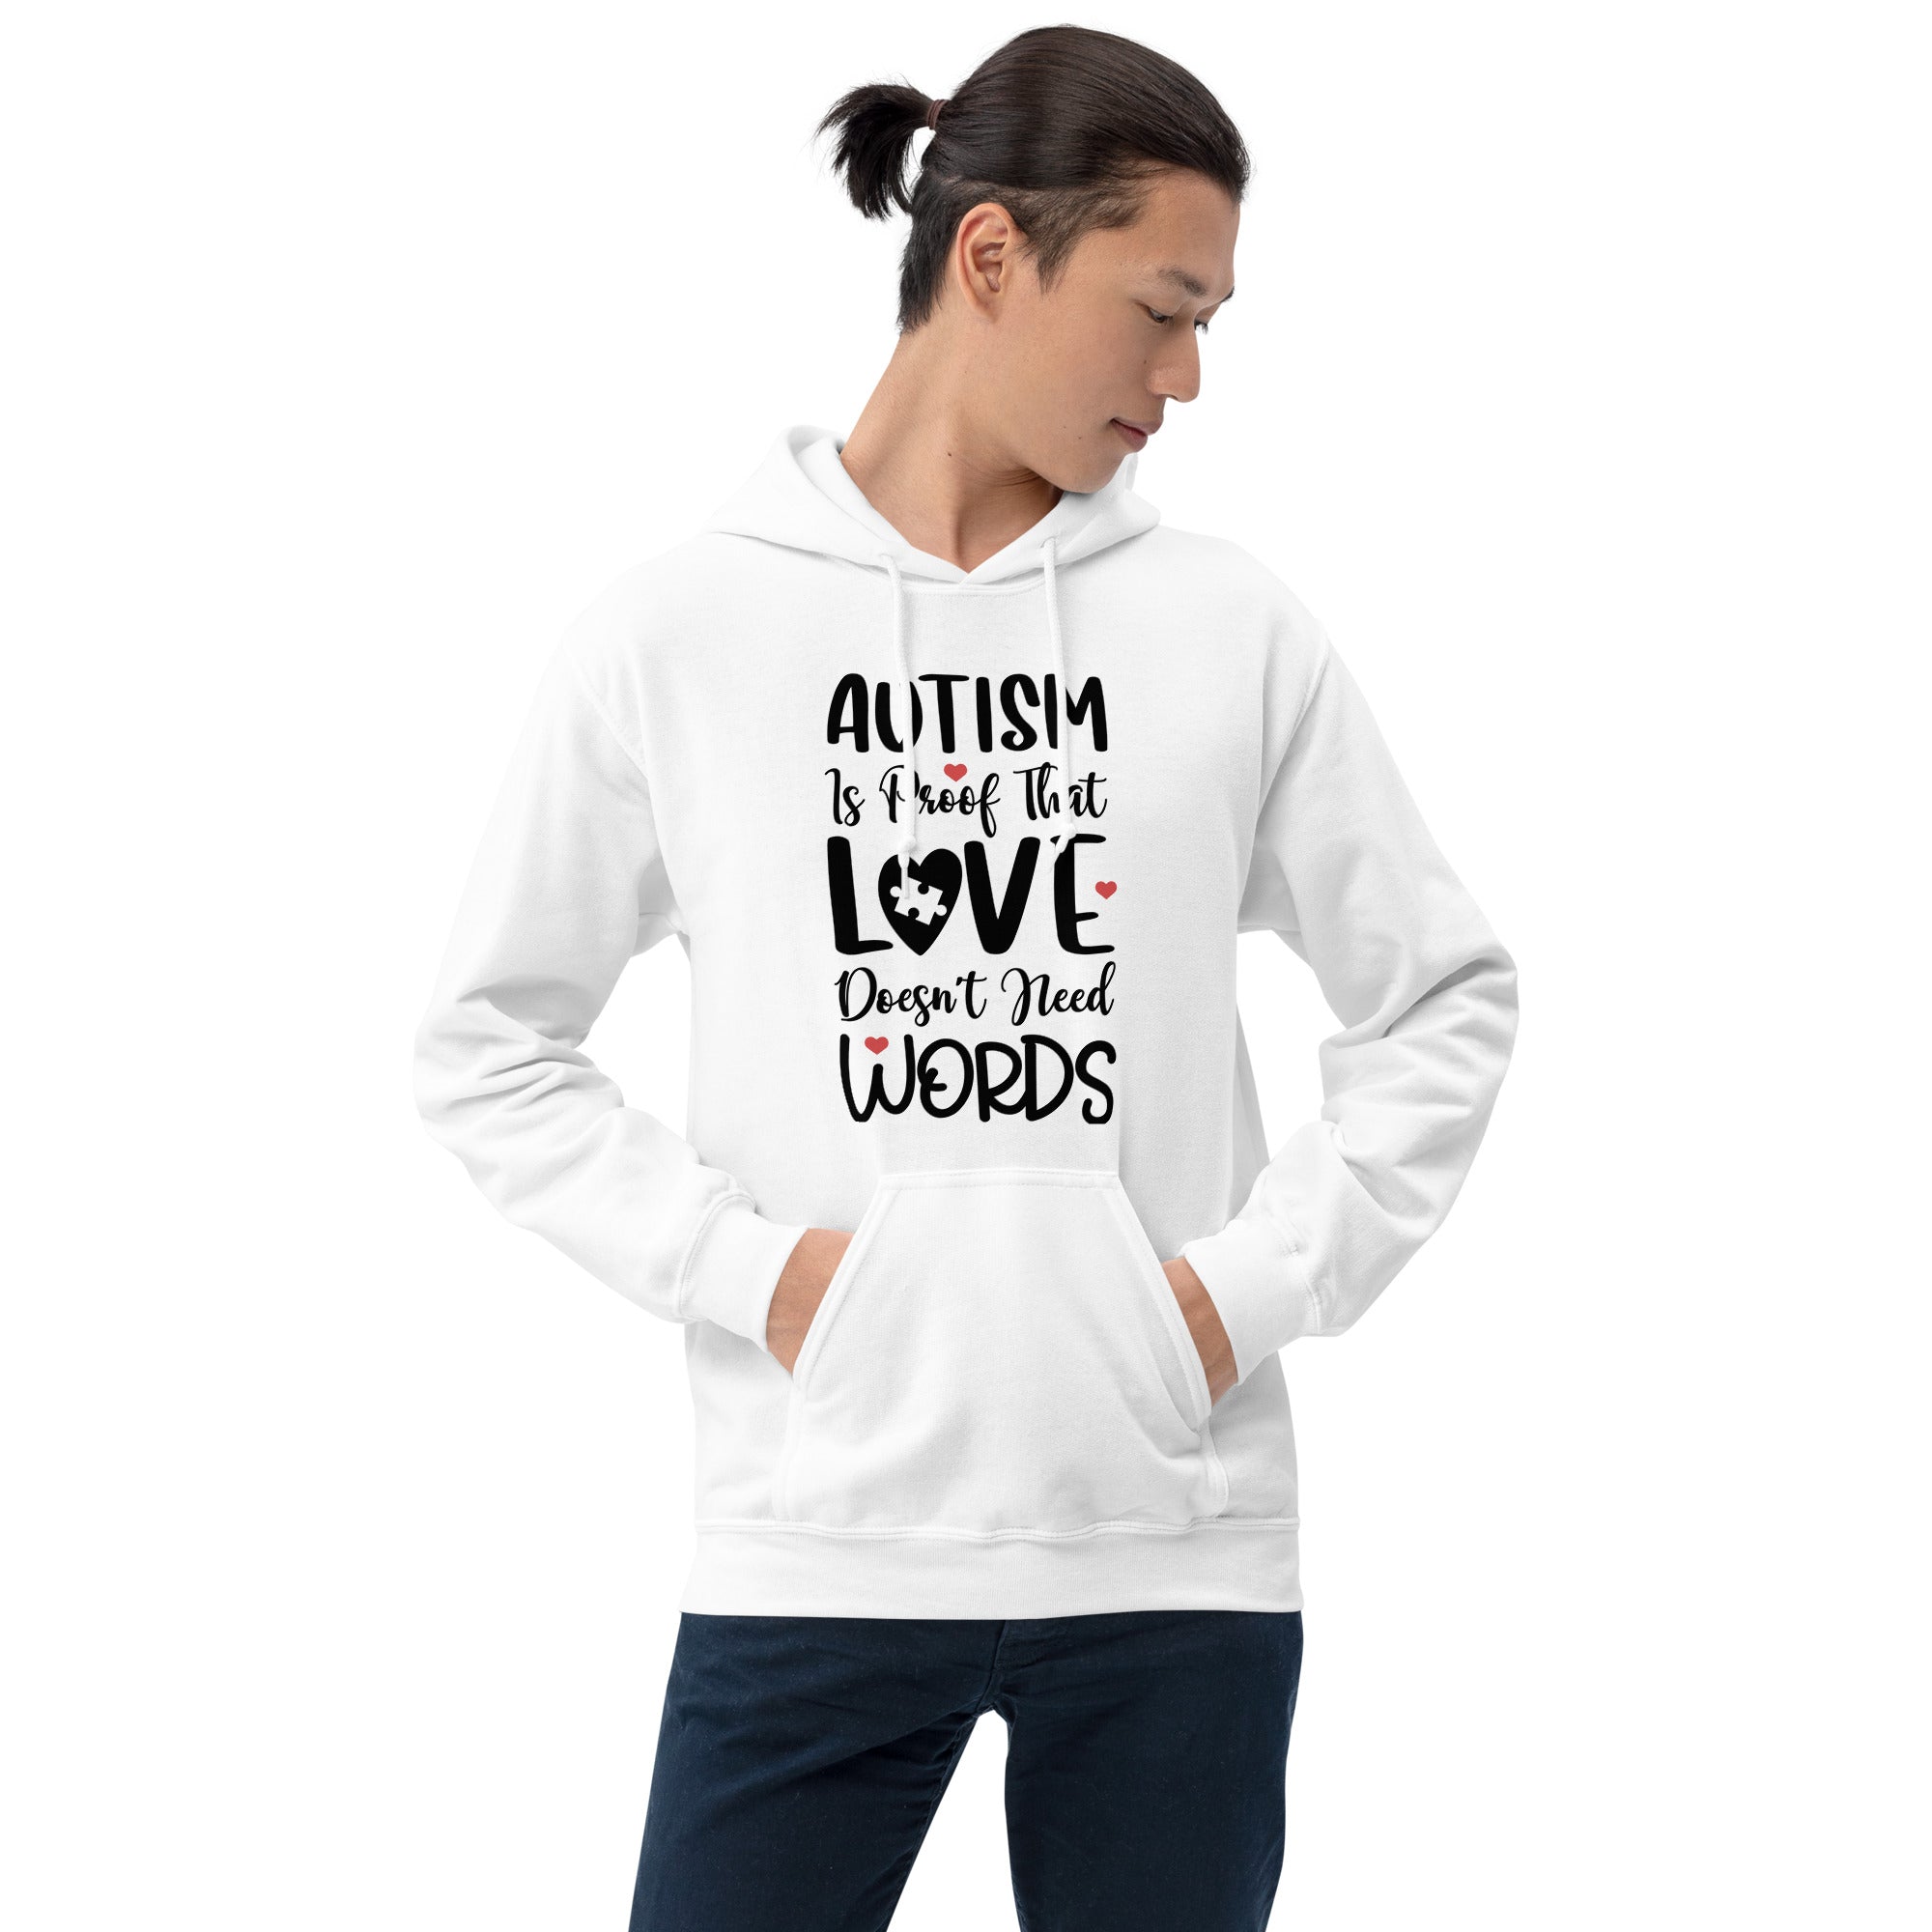 Unisex Hoodie- Autism is proof that Love love doesn't need words